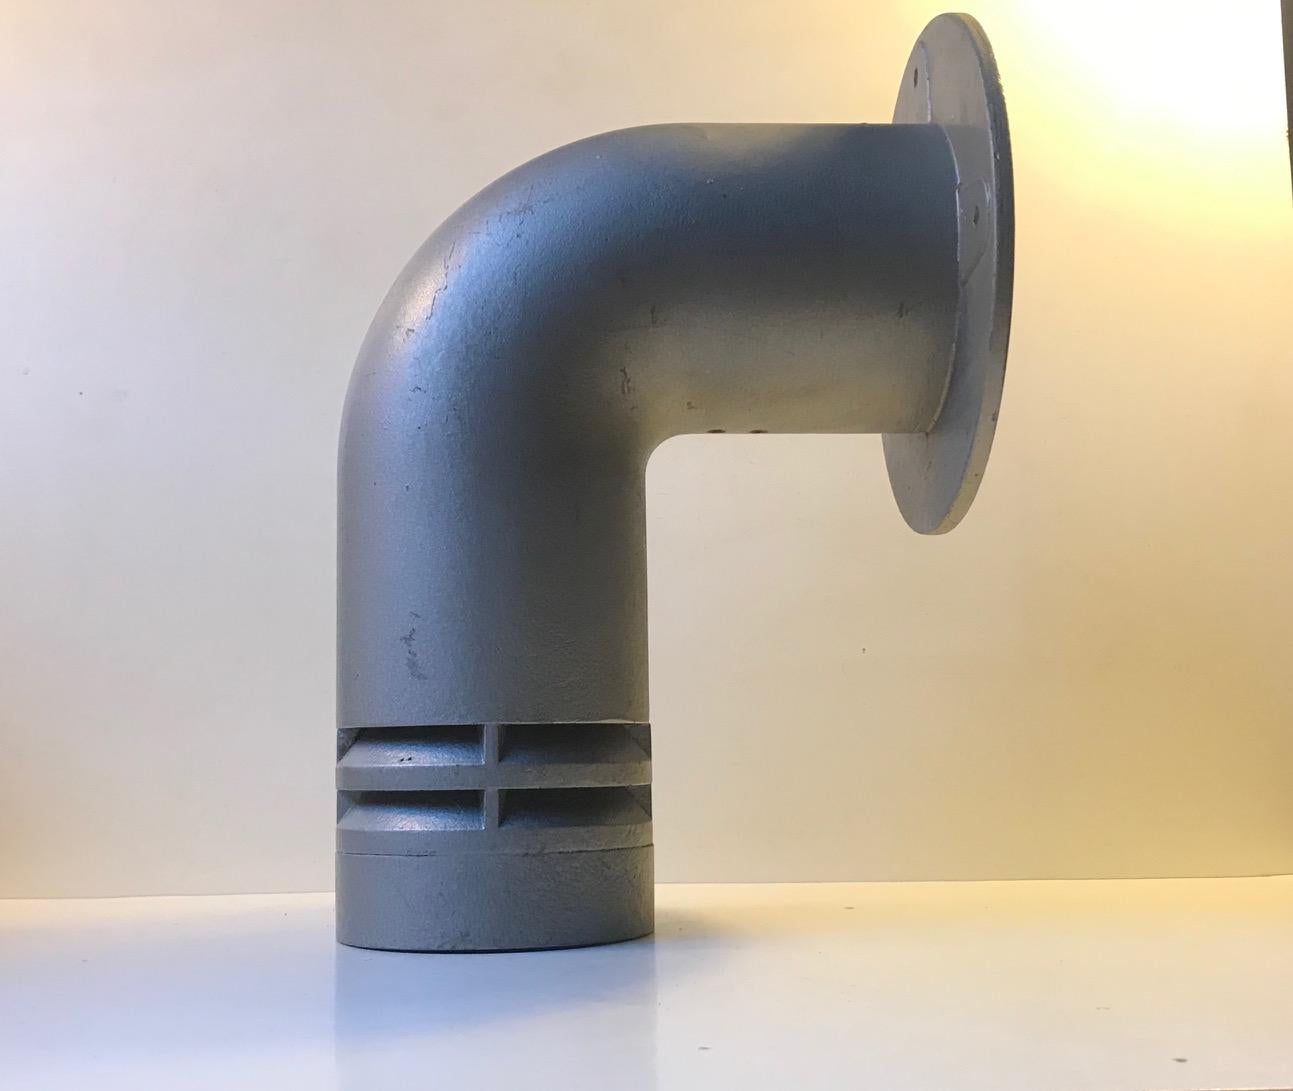 Large pipe-shaped industrial outdoor wall light. Designed by the Danish architect Ole Pless Jorgensen and manufactured by Nordisk Solar Kompagni in Denmark during the late 1970s. Its made entirely of surface-treated aluminium, it has a rubber